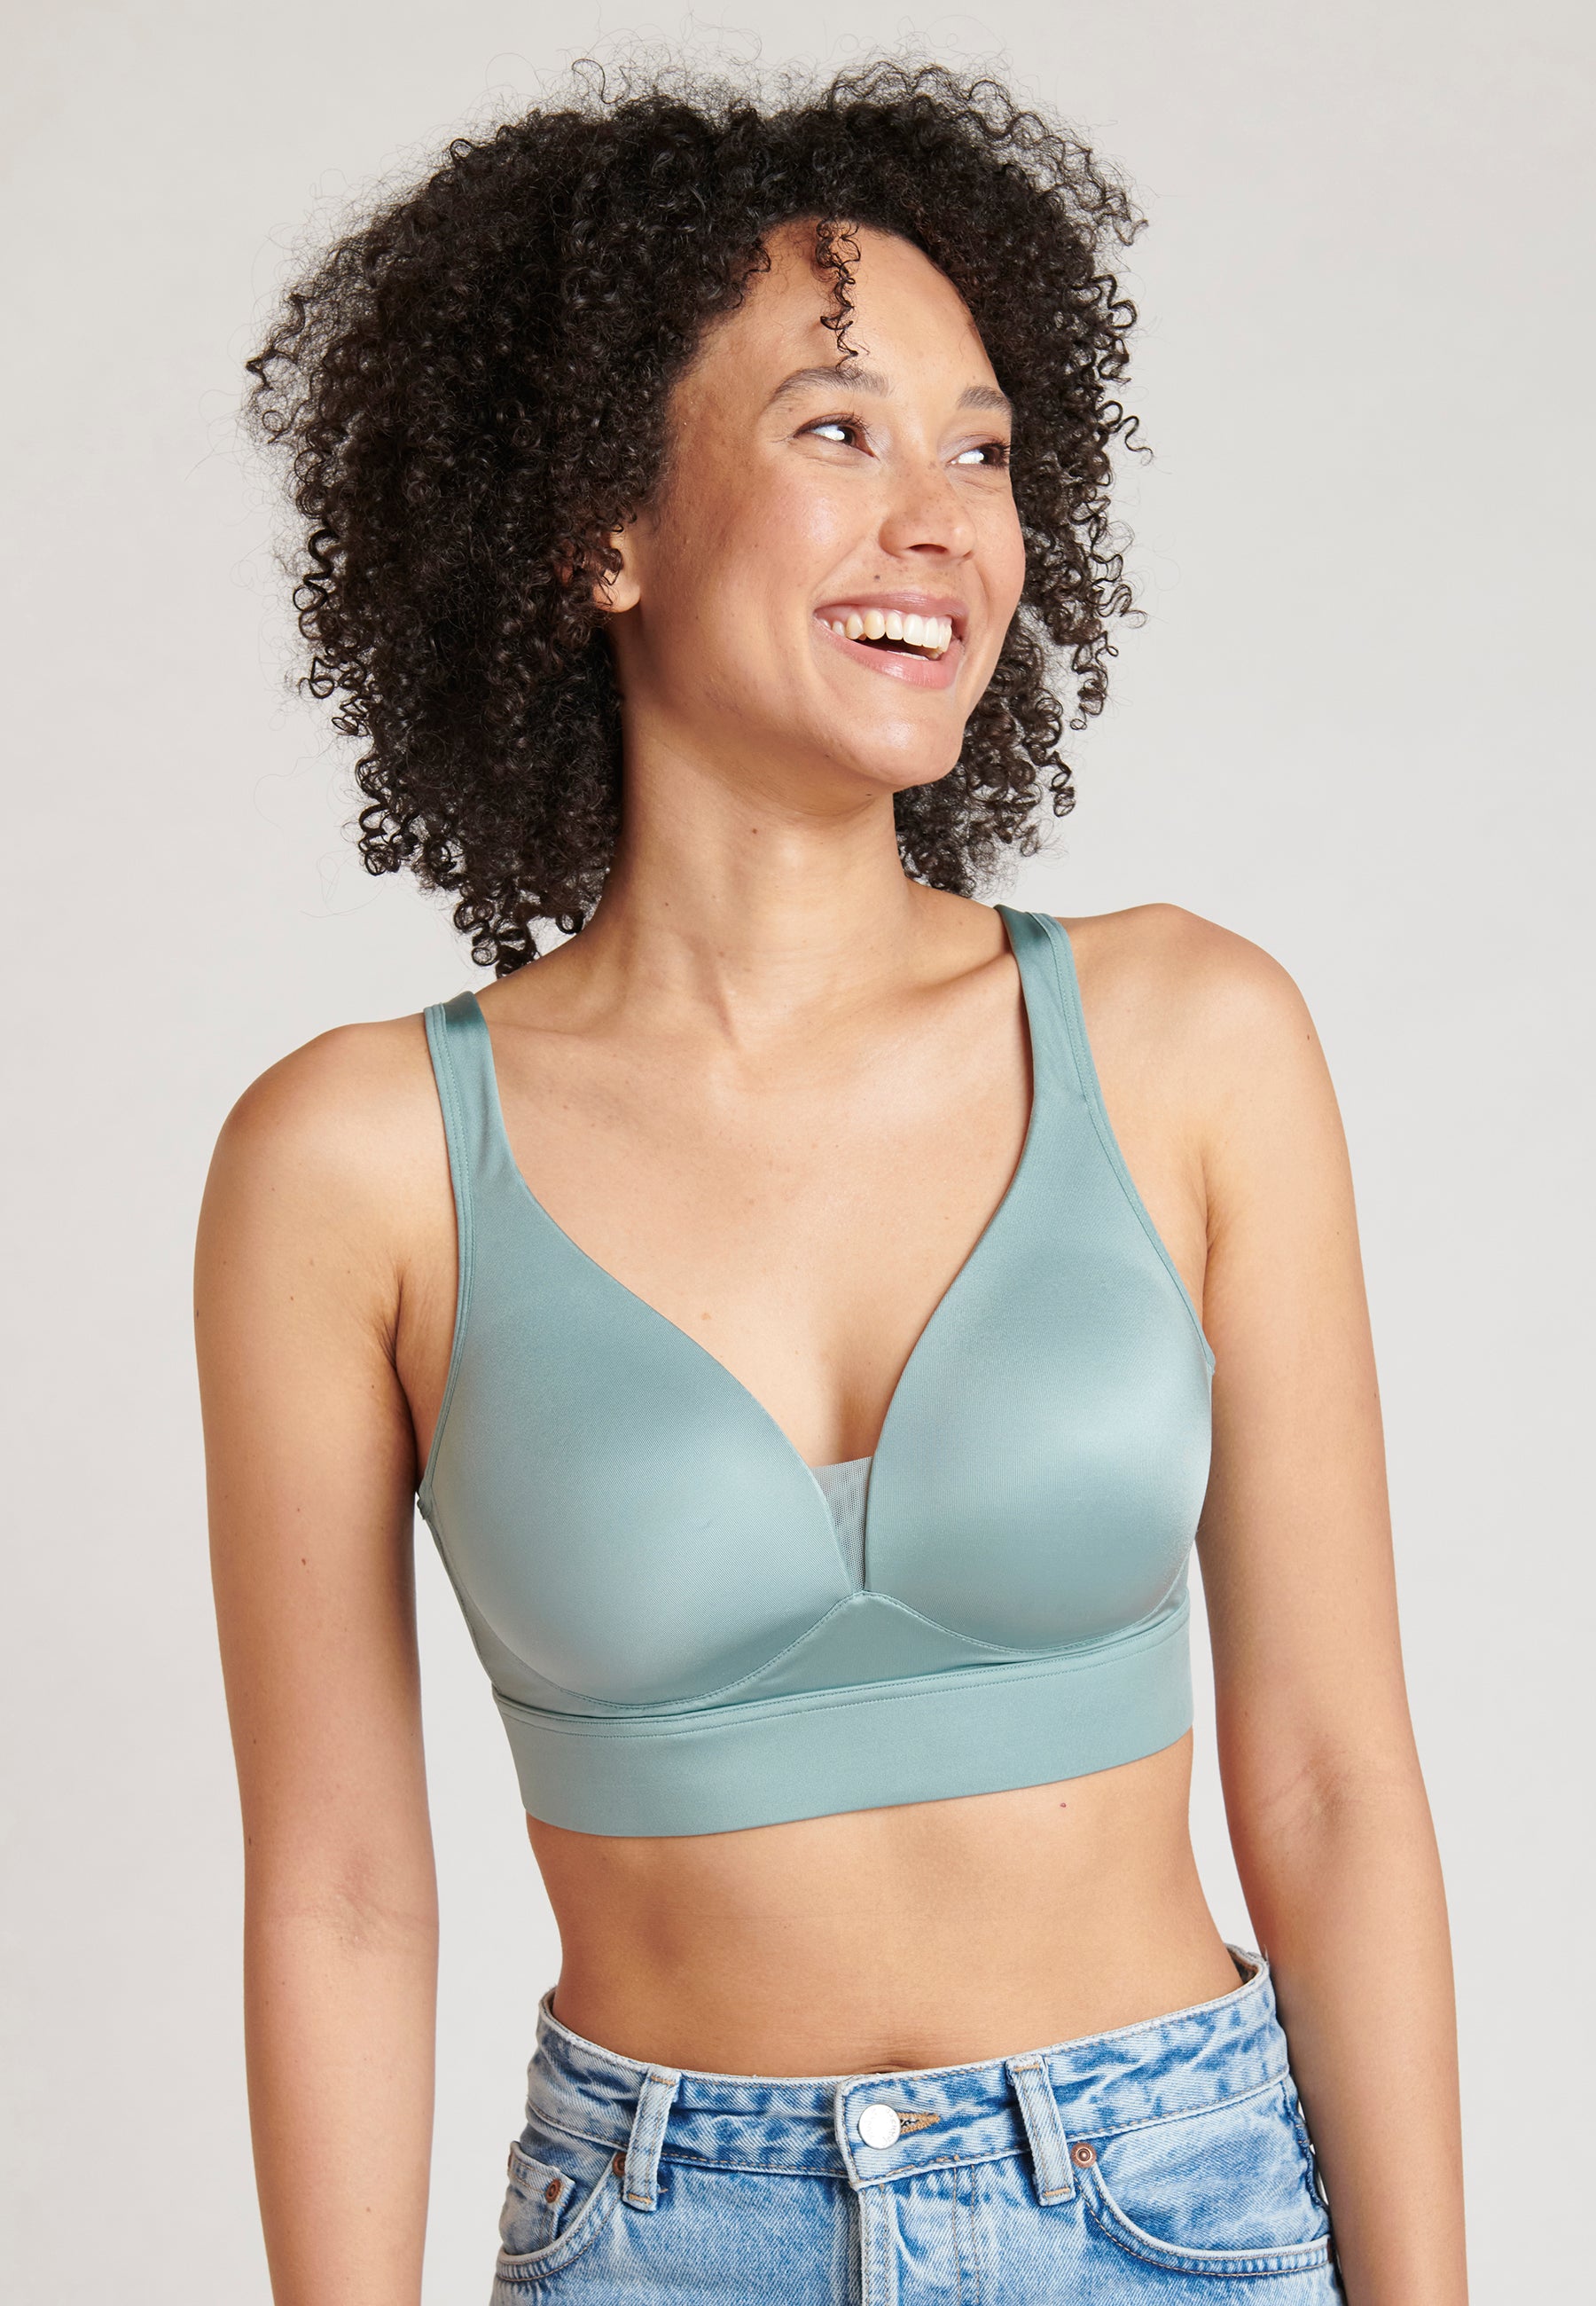 Jockey® Forever Fit™ V-Neck Molded Cup Bra (Plus Size Available